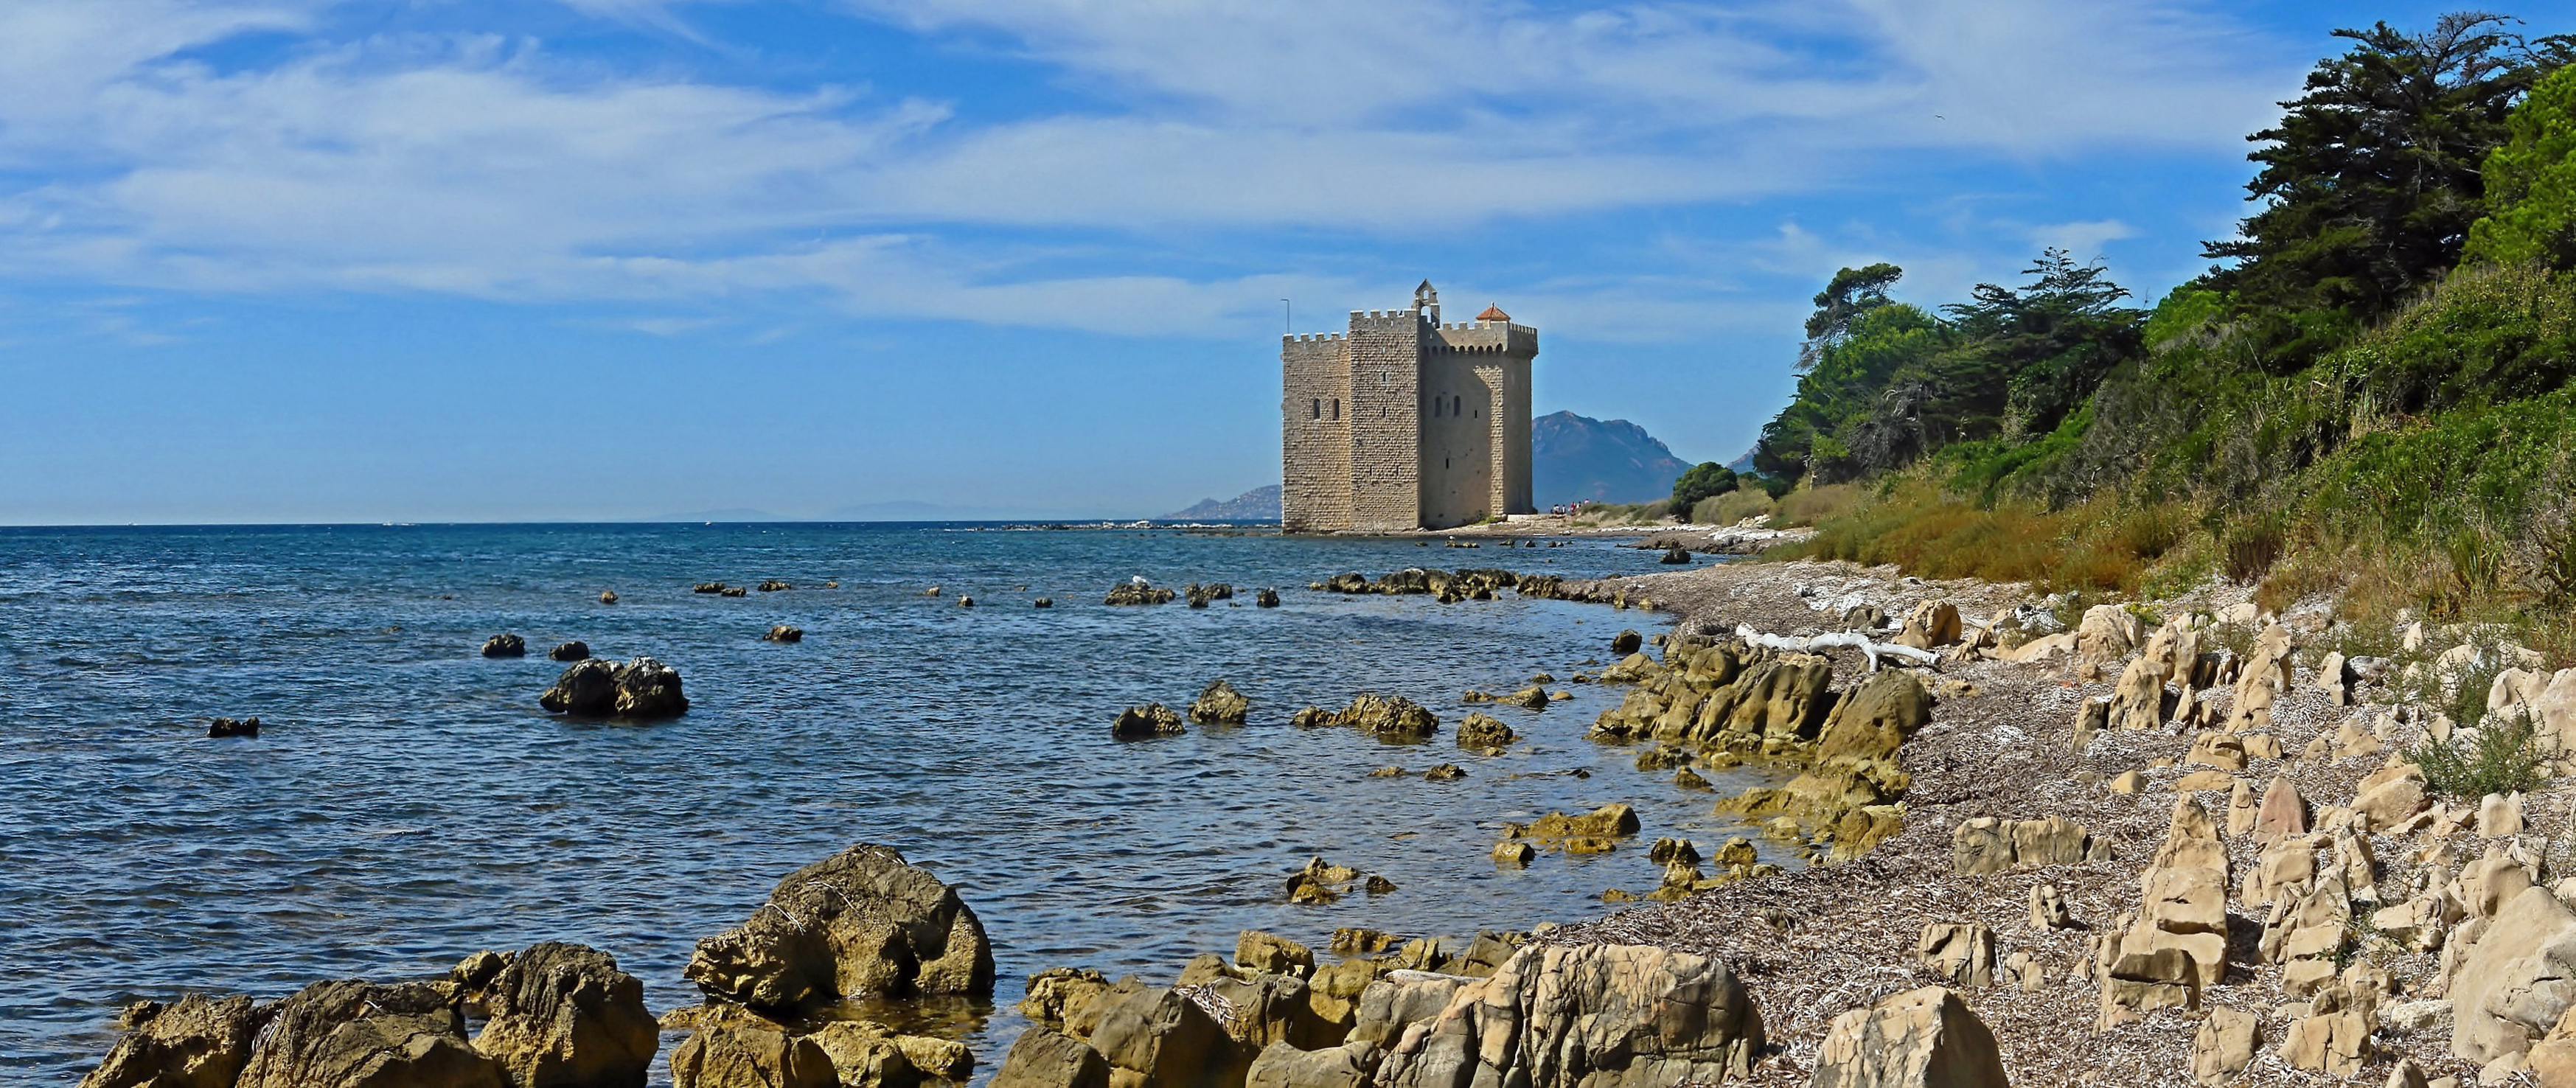 Old fortified monastery of the Lérins Abbey, on the island of Saint-Honorat, one of the Lérins Islands, next to Cannes.  Building started in 1073 to protect the monks from the attacks of Saracen pirates. The picture was obtained after stiching 3 pictures.